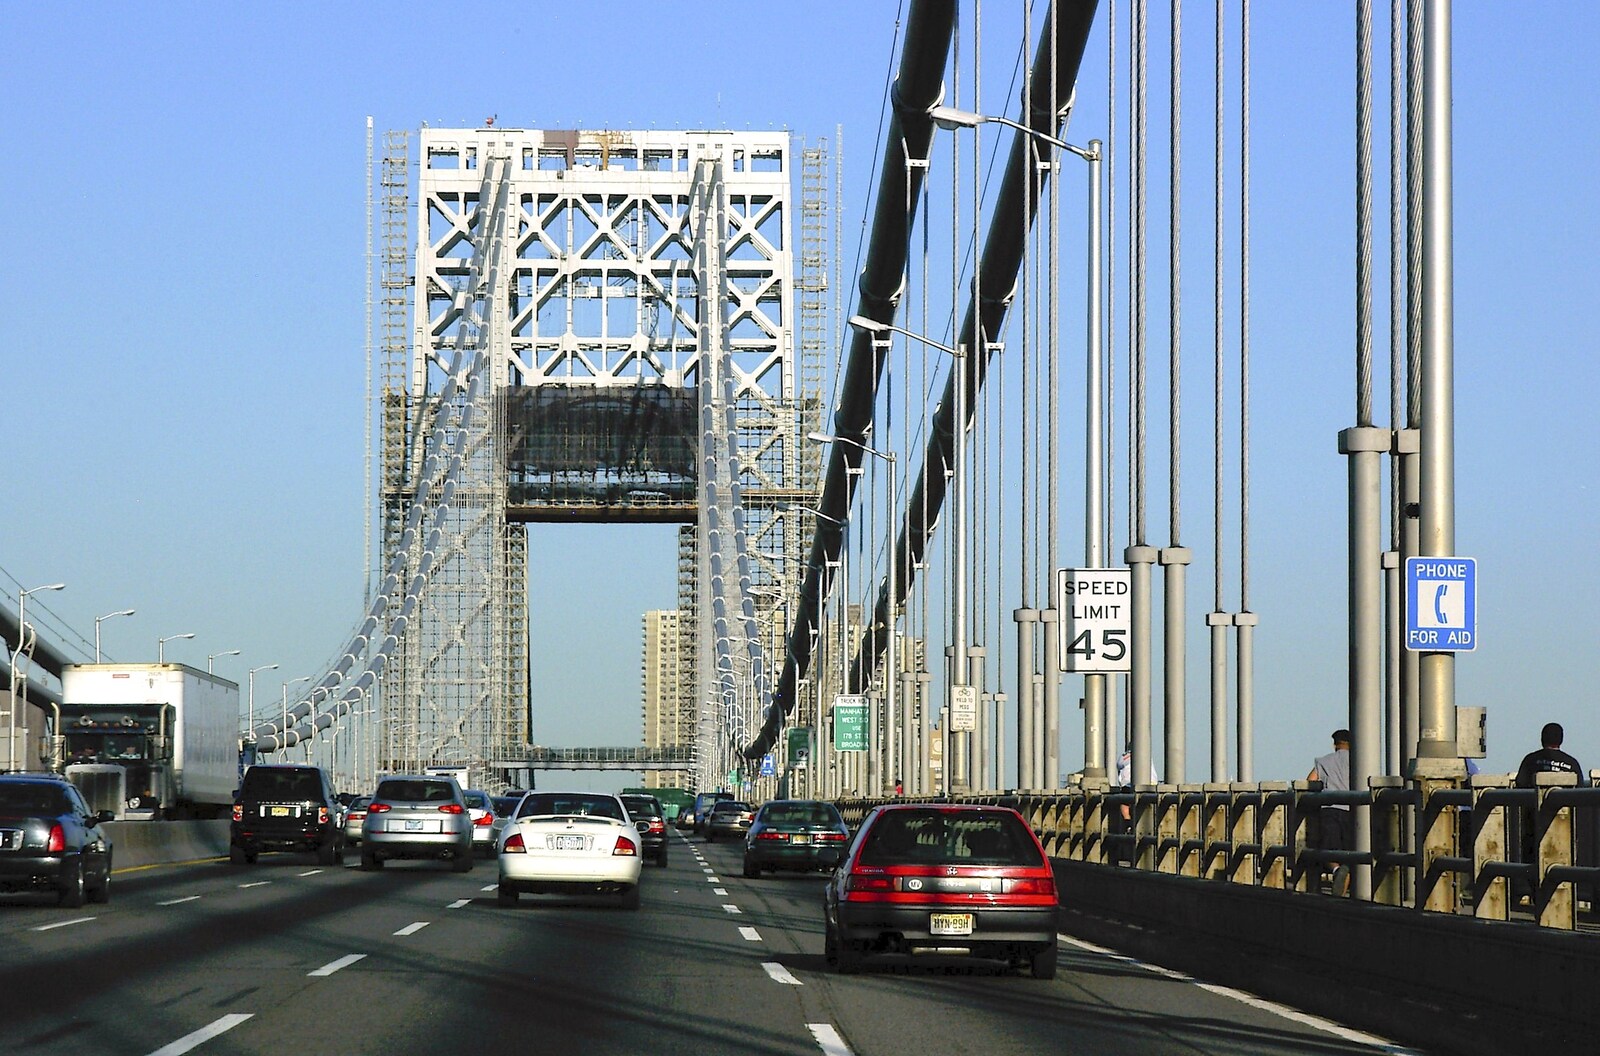 The George Washington bridge from Phil and the Fair Harbor Fire Engine, Fire Island, New York State, US - 30th April 2006